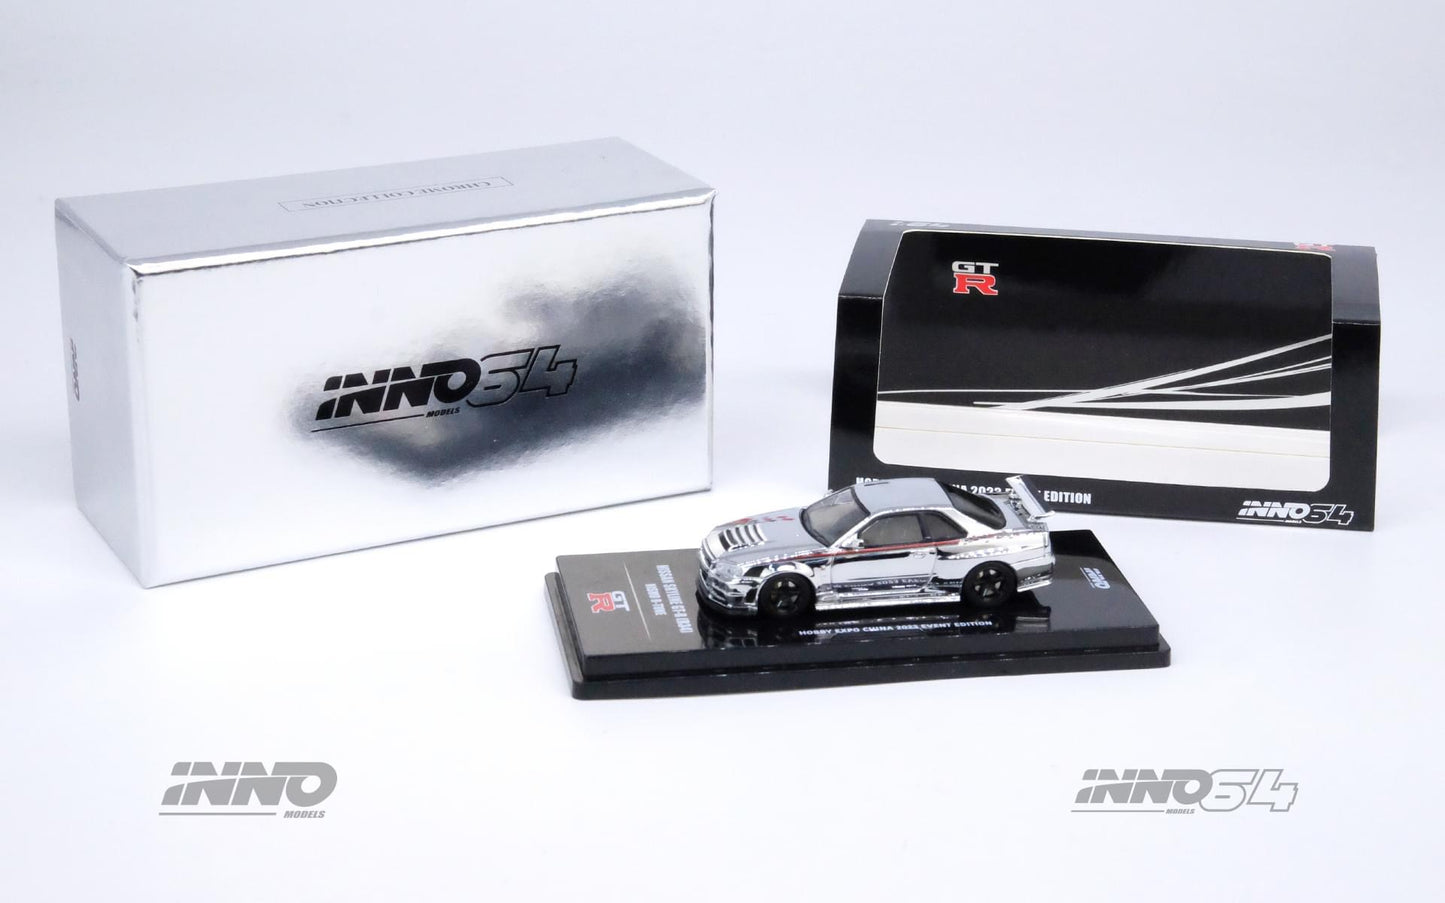 Inno64 China Hobby Expo Event Exclusive - Nissan Skyline GT-R R34 Nismo R-Tune SET OF 3